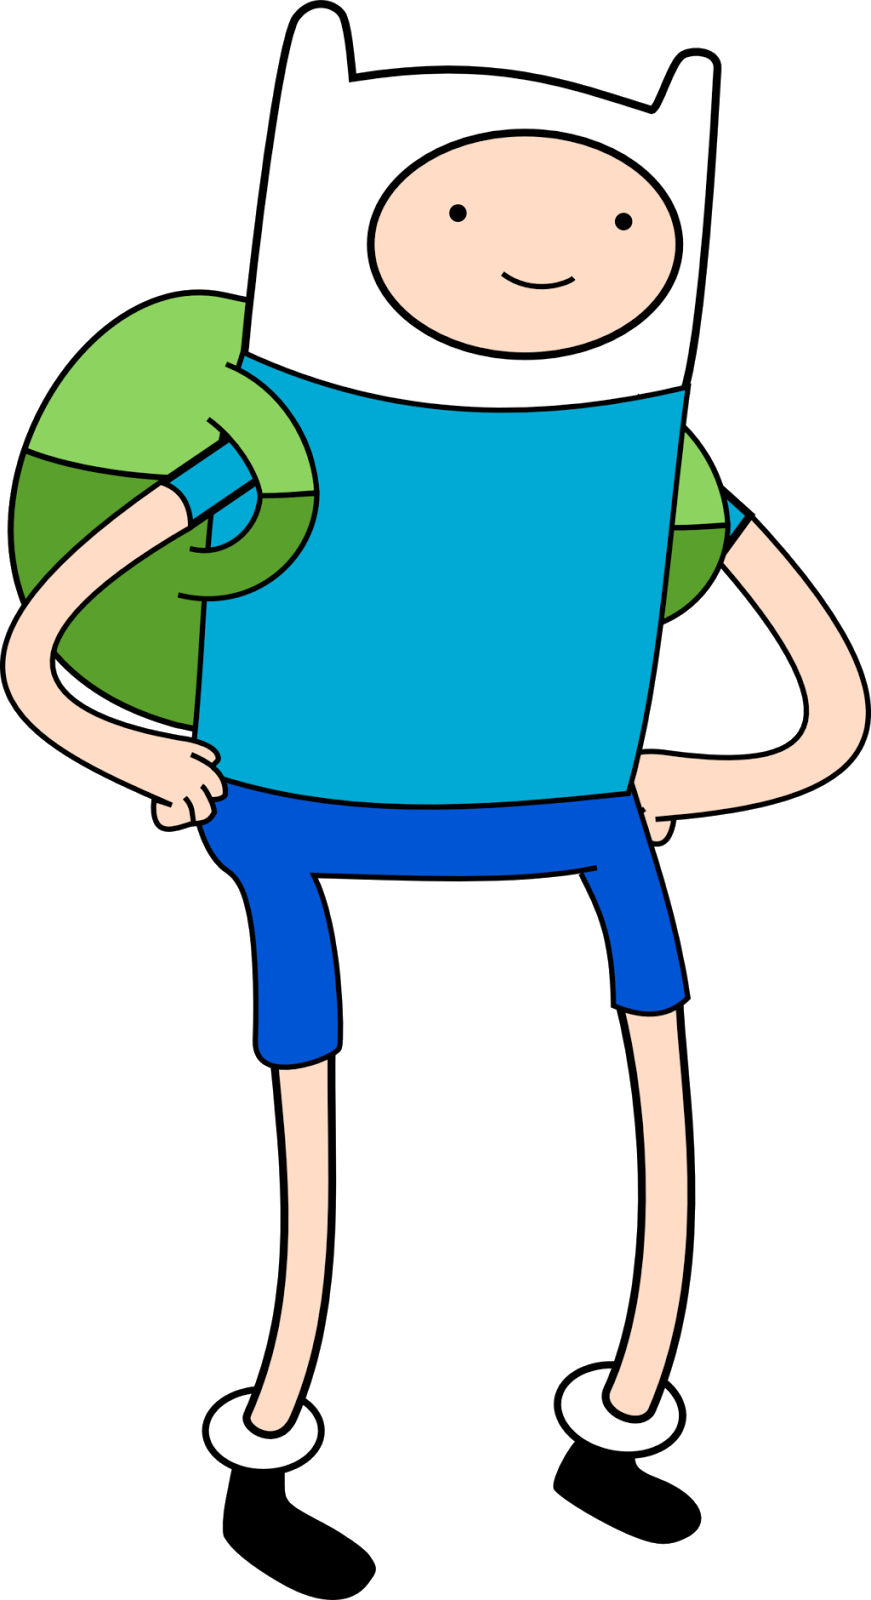 Finn the human Adventure Time Cartoon Characters PNG #44258 - Free